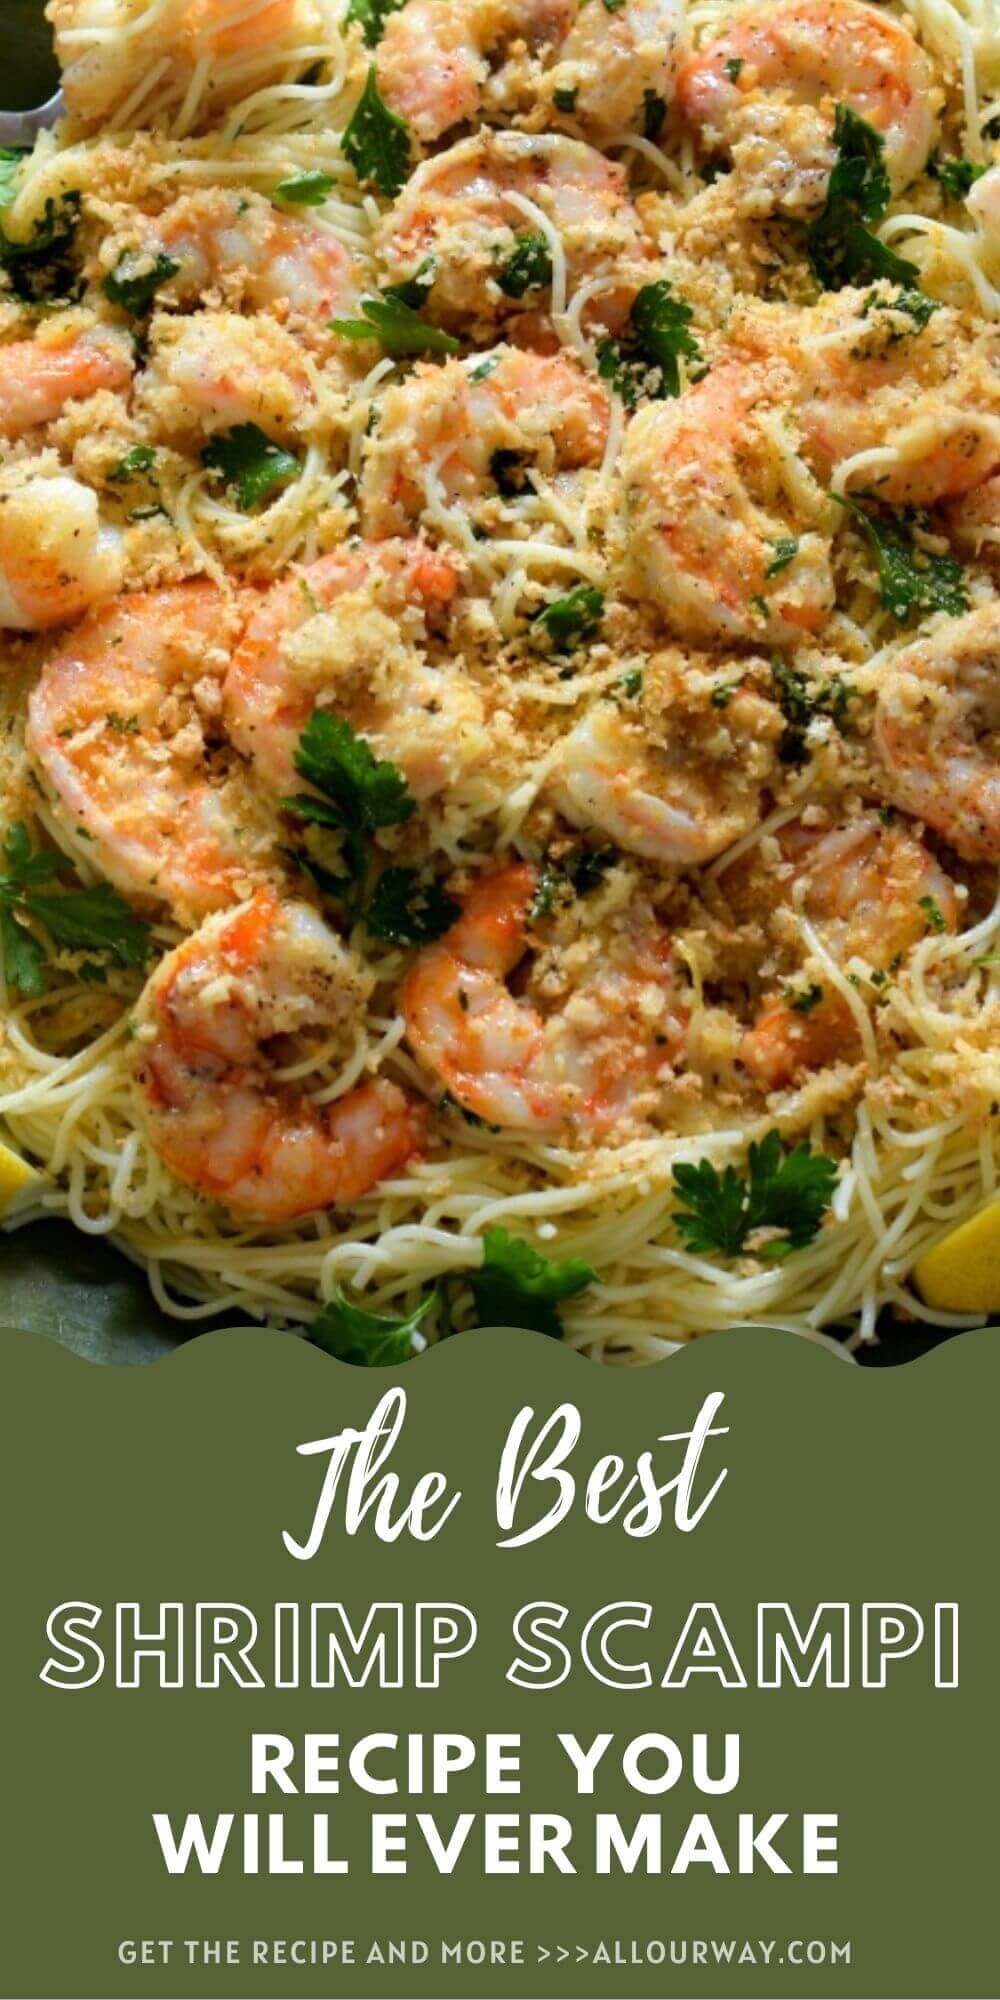 Our shrimp scampi recipe uses a few kitchen tricks to ensure that the shrimp is juicy and tender with enough sauce to flavor the angel hair pasta. The shrimp is brined and then poached in the wine stock sauce. Slice the garlic, so the sauce is not bitter or grainy. A satisfying seafood pasta dish that is easy enough for a weeknight but tastes special enough for company